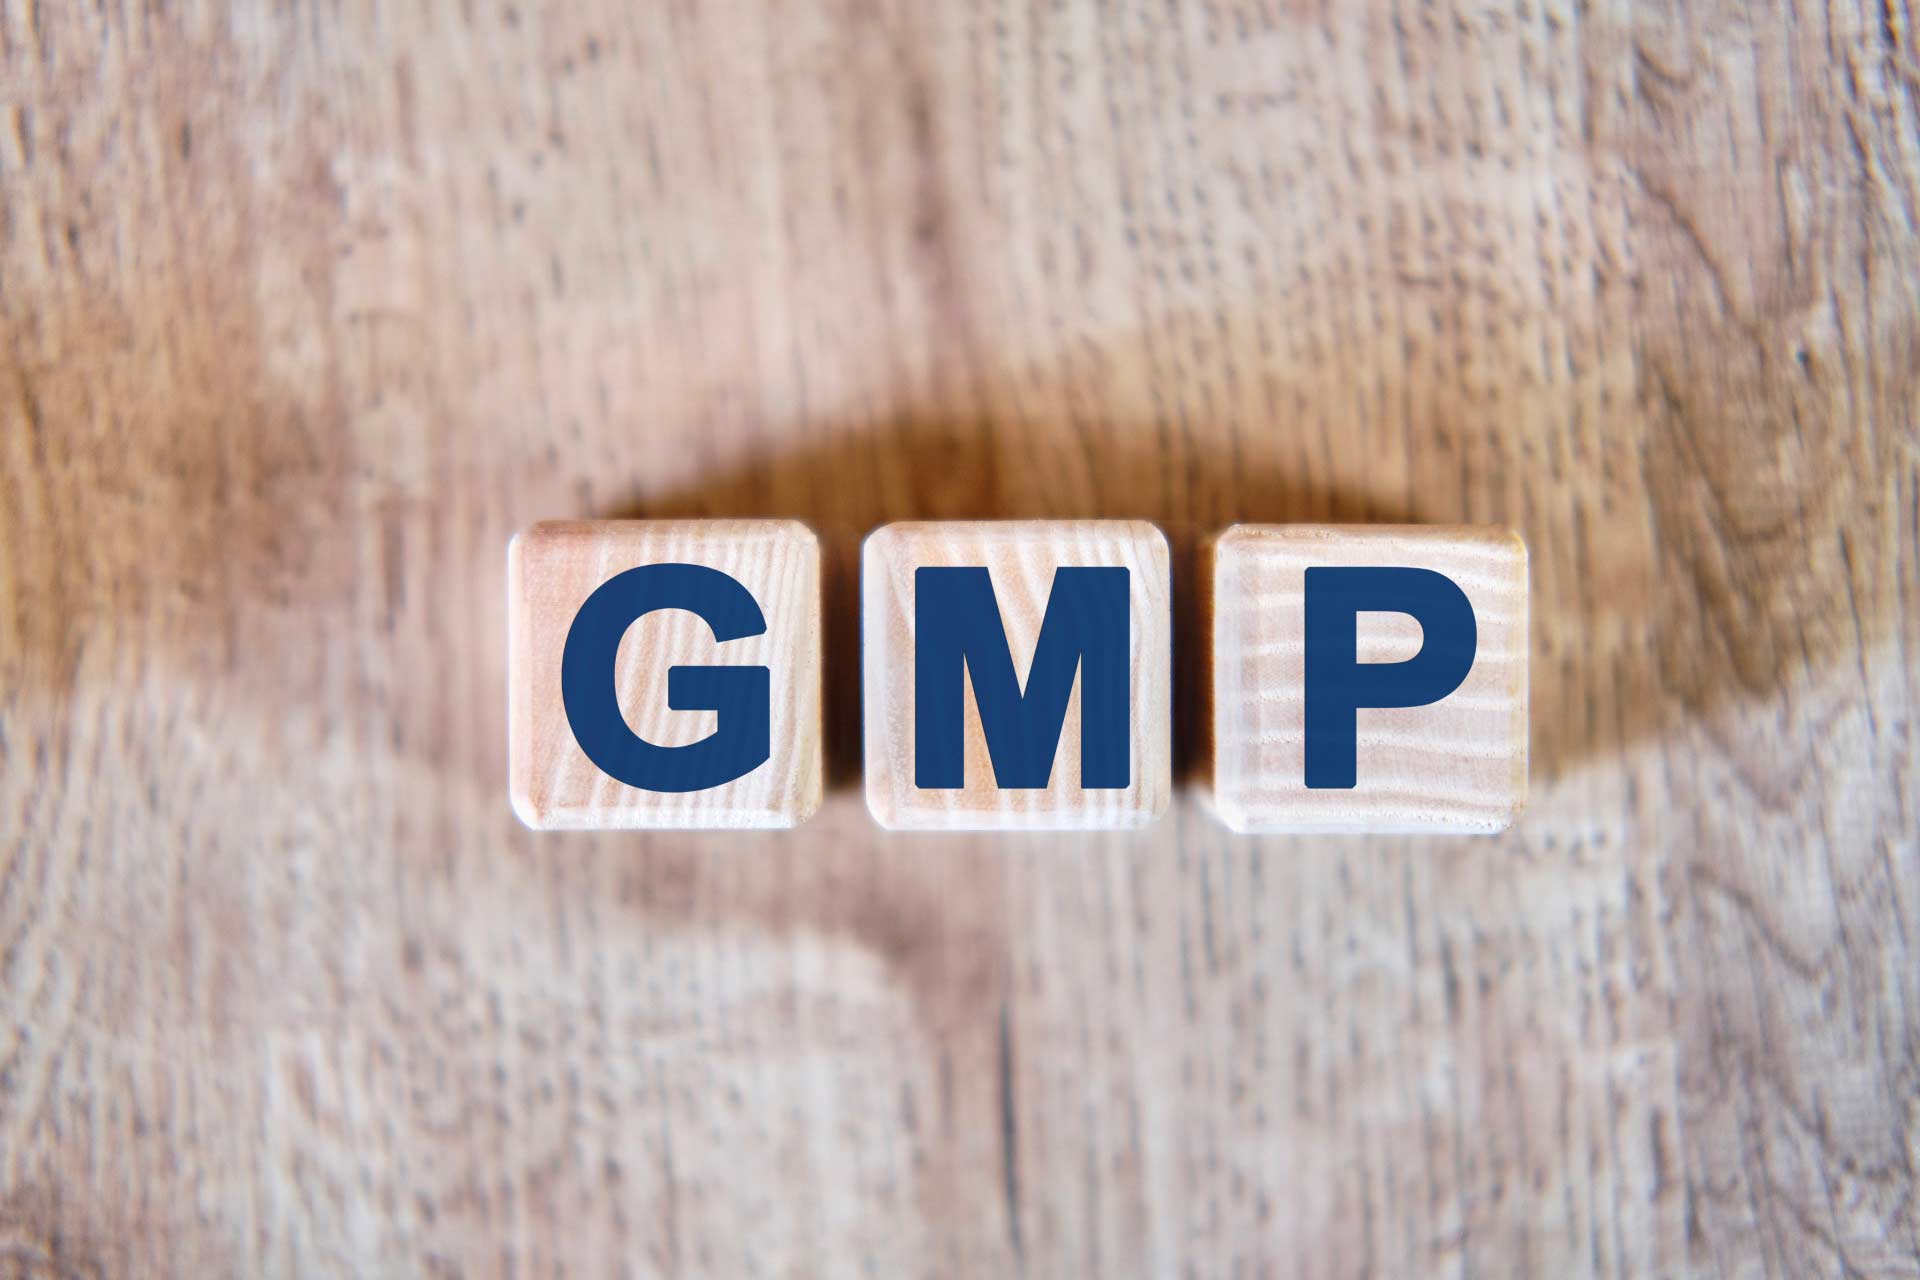 Wood letter dice with “G-M-P” standing for Good Manufacturing Practices, which Wana Brands follows.